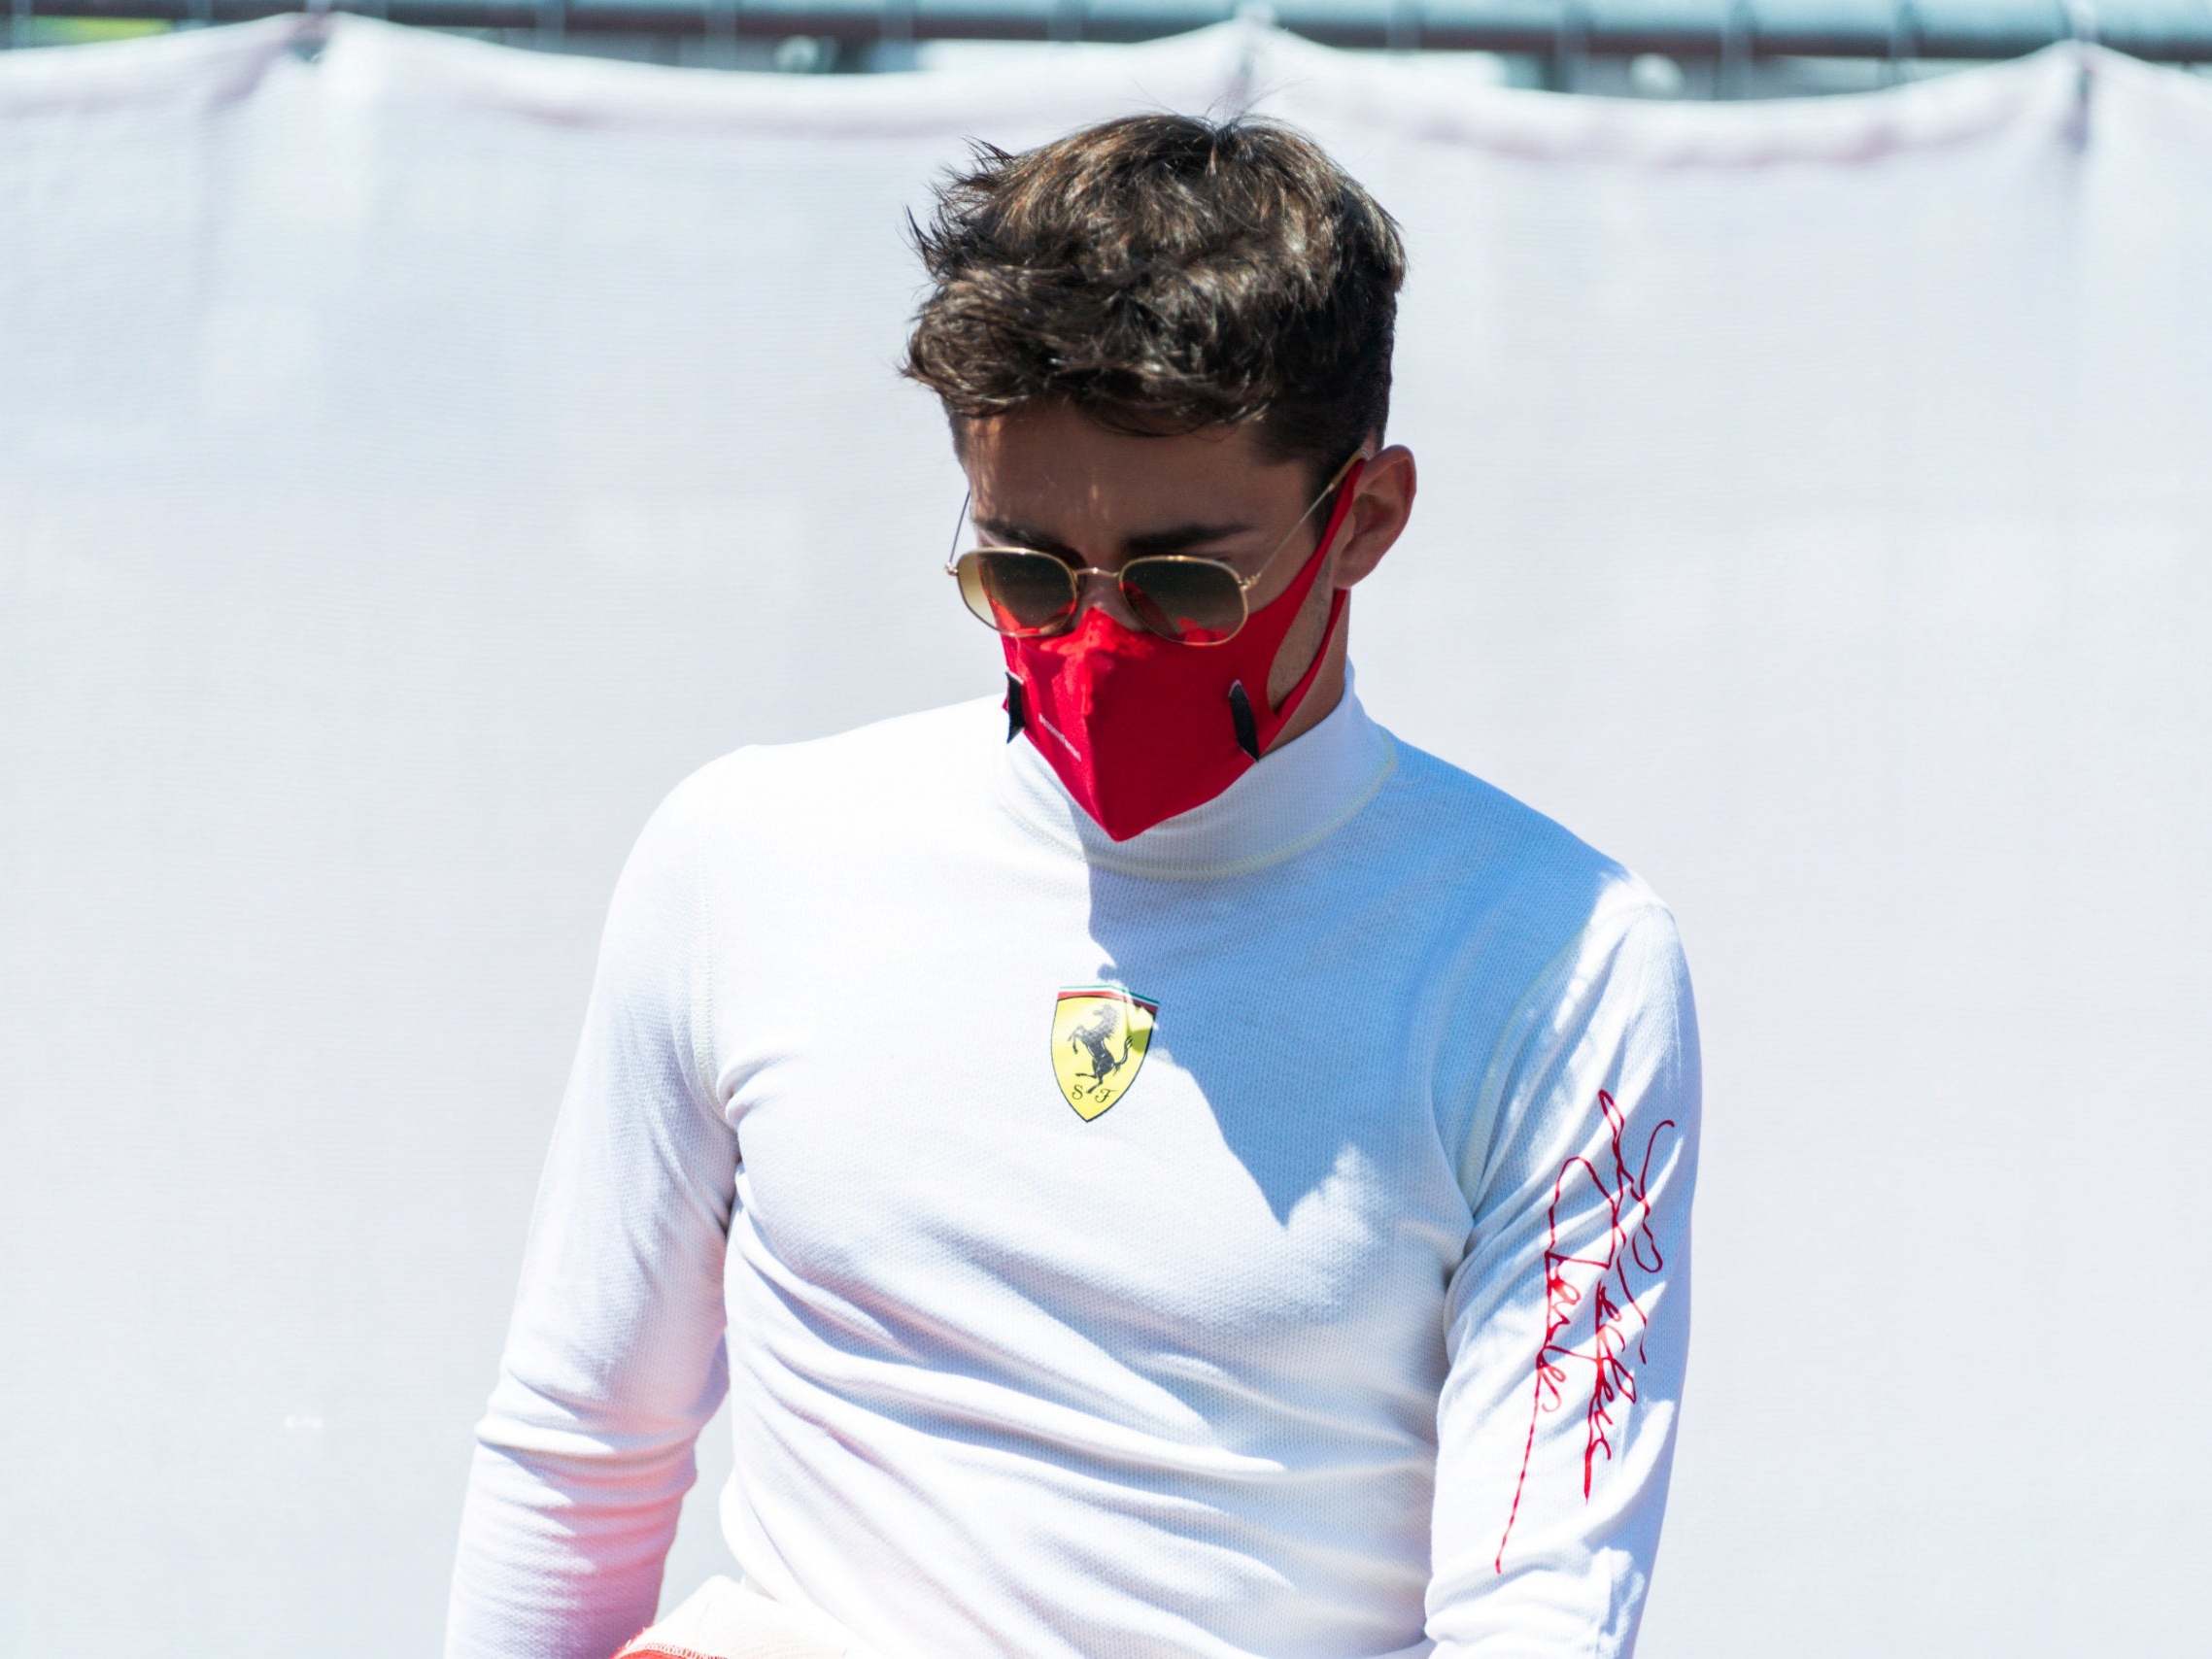 Austrian Grand Prix: Charles Leclerc and Max Verstappen confirm they will not take knee before race